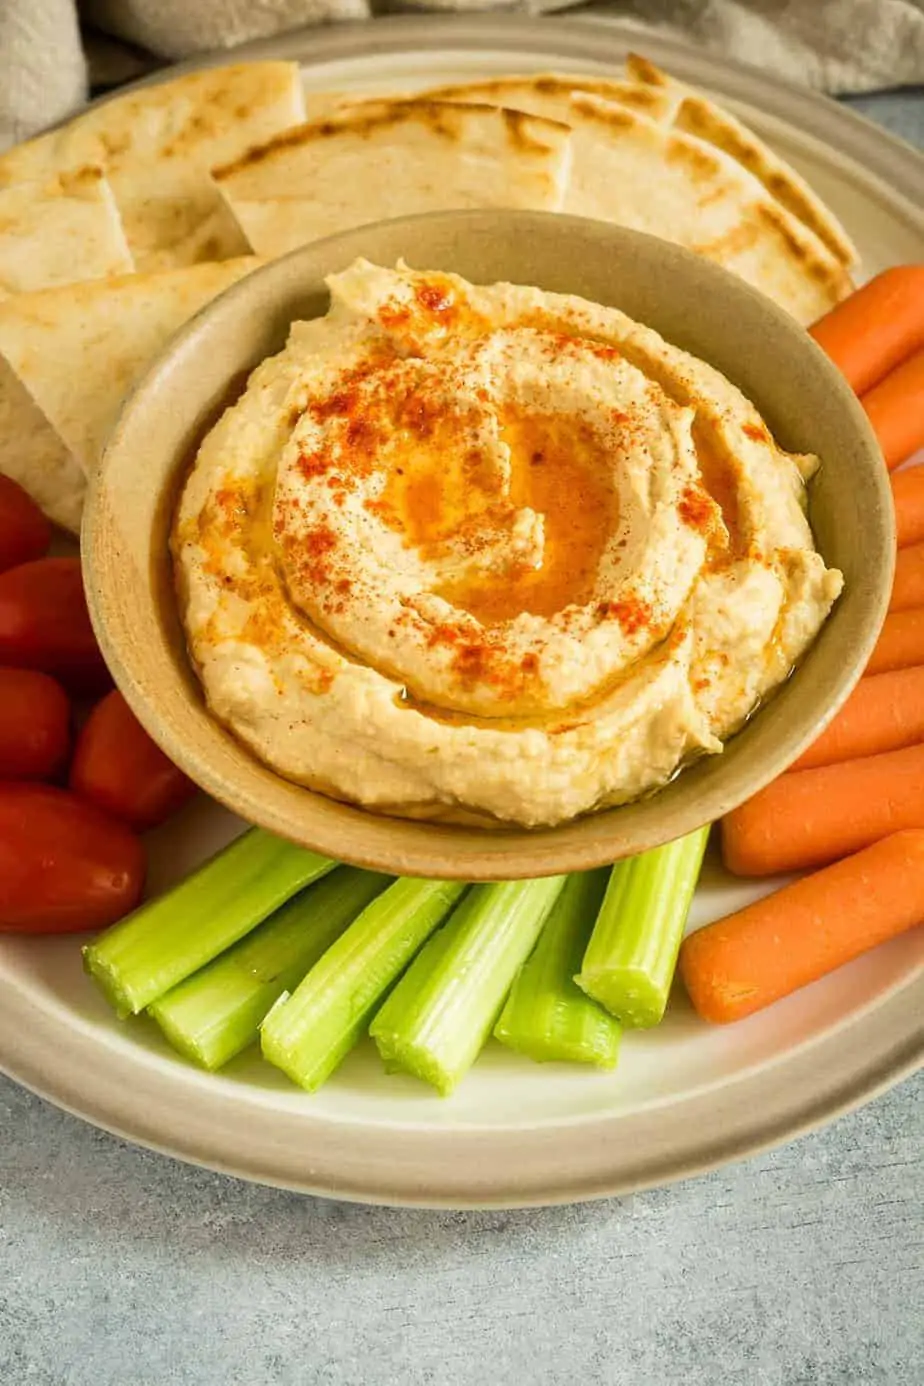 instant pot hummus serve with pitta bread, carrots, celery and cherry tomatoes.